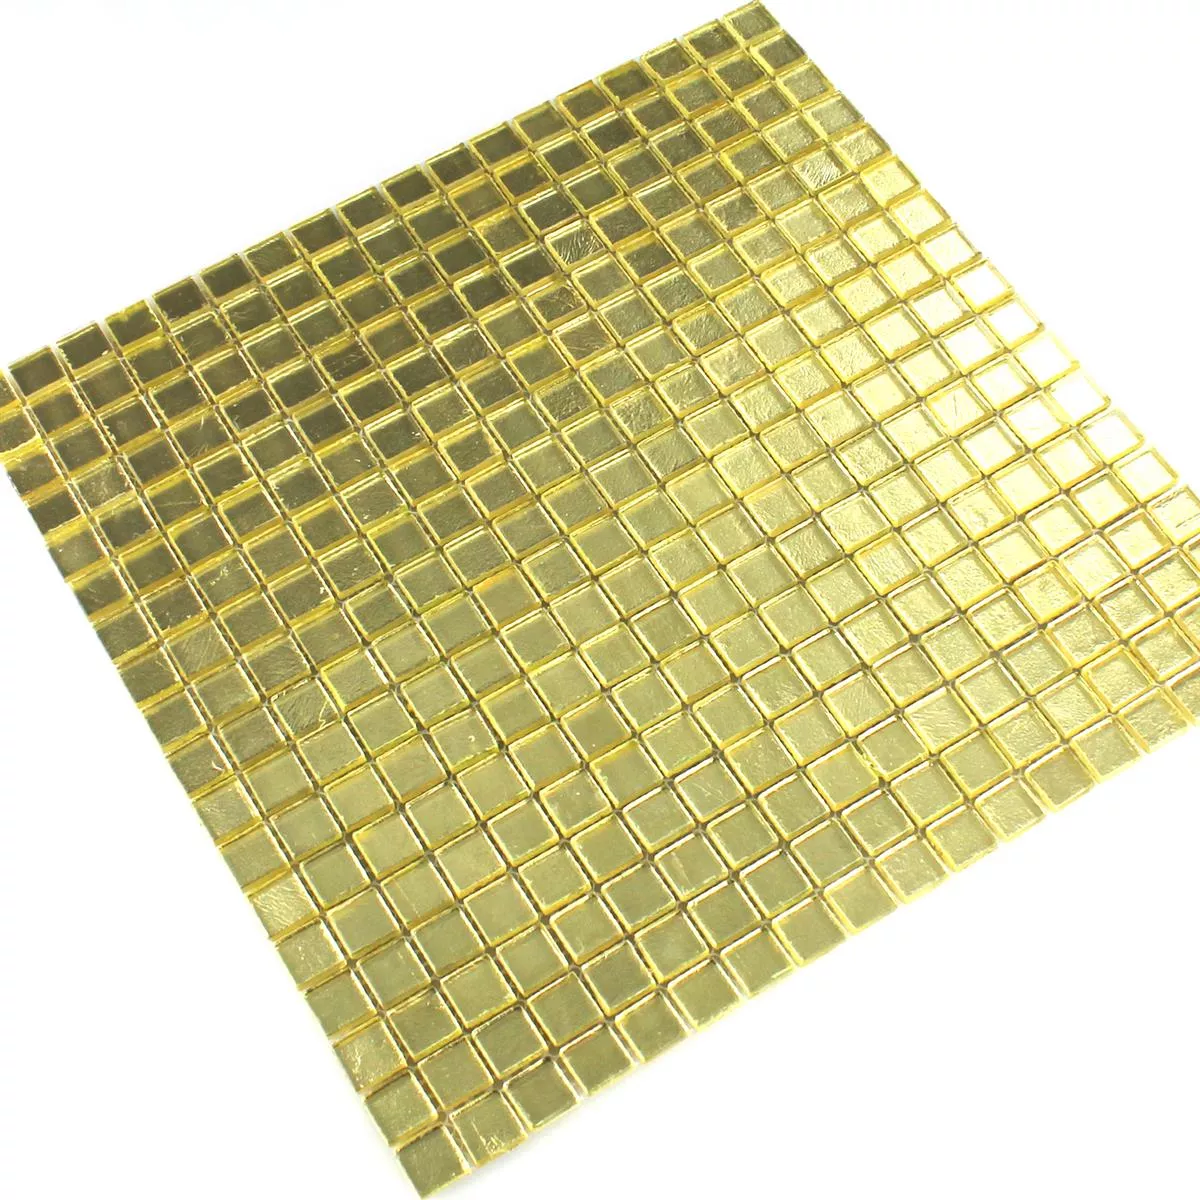 Sample Mosaic Tiles Glass Capone Gold